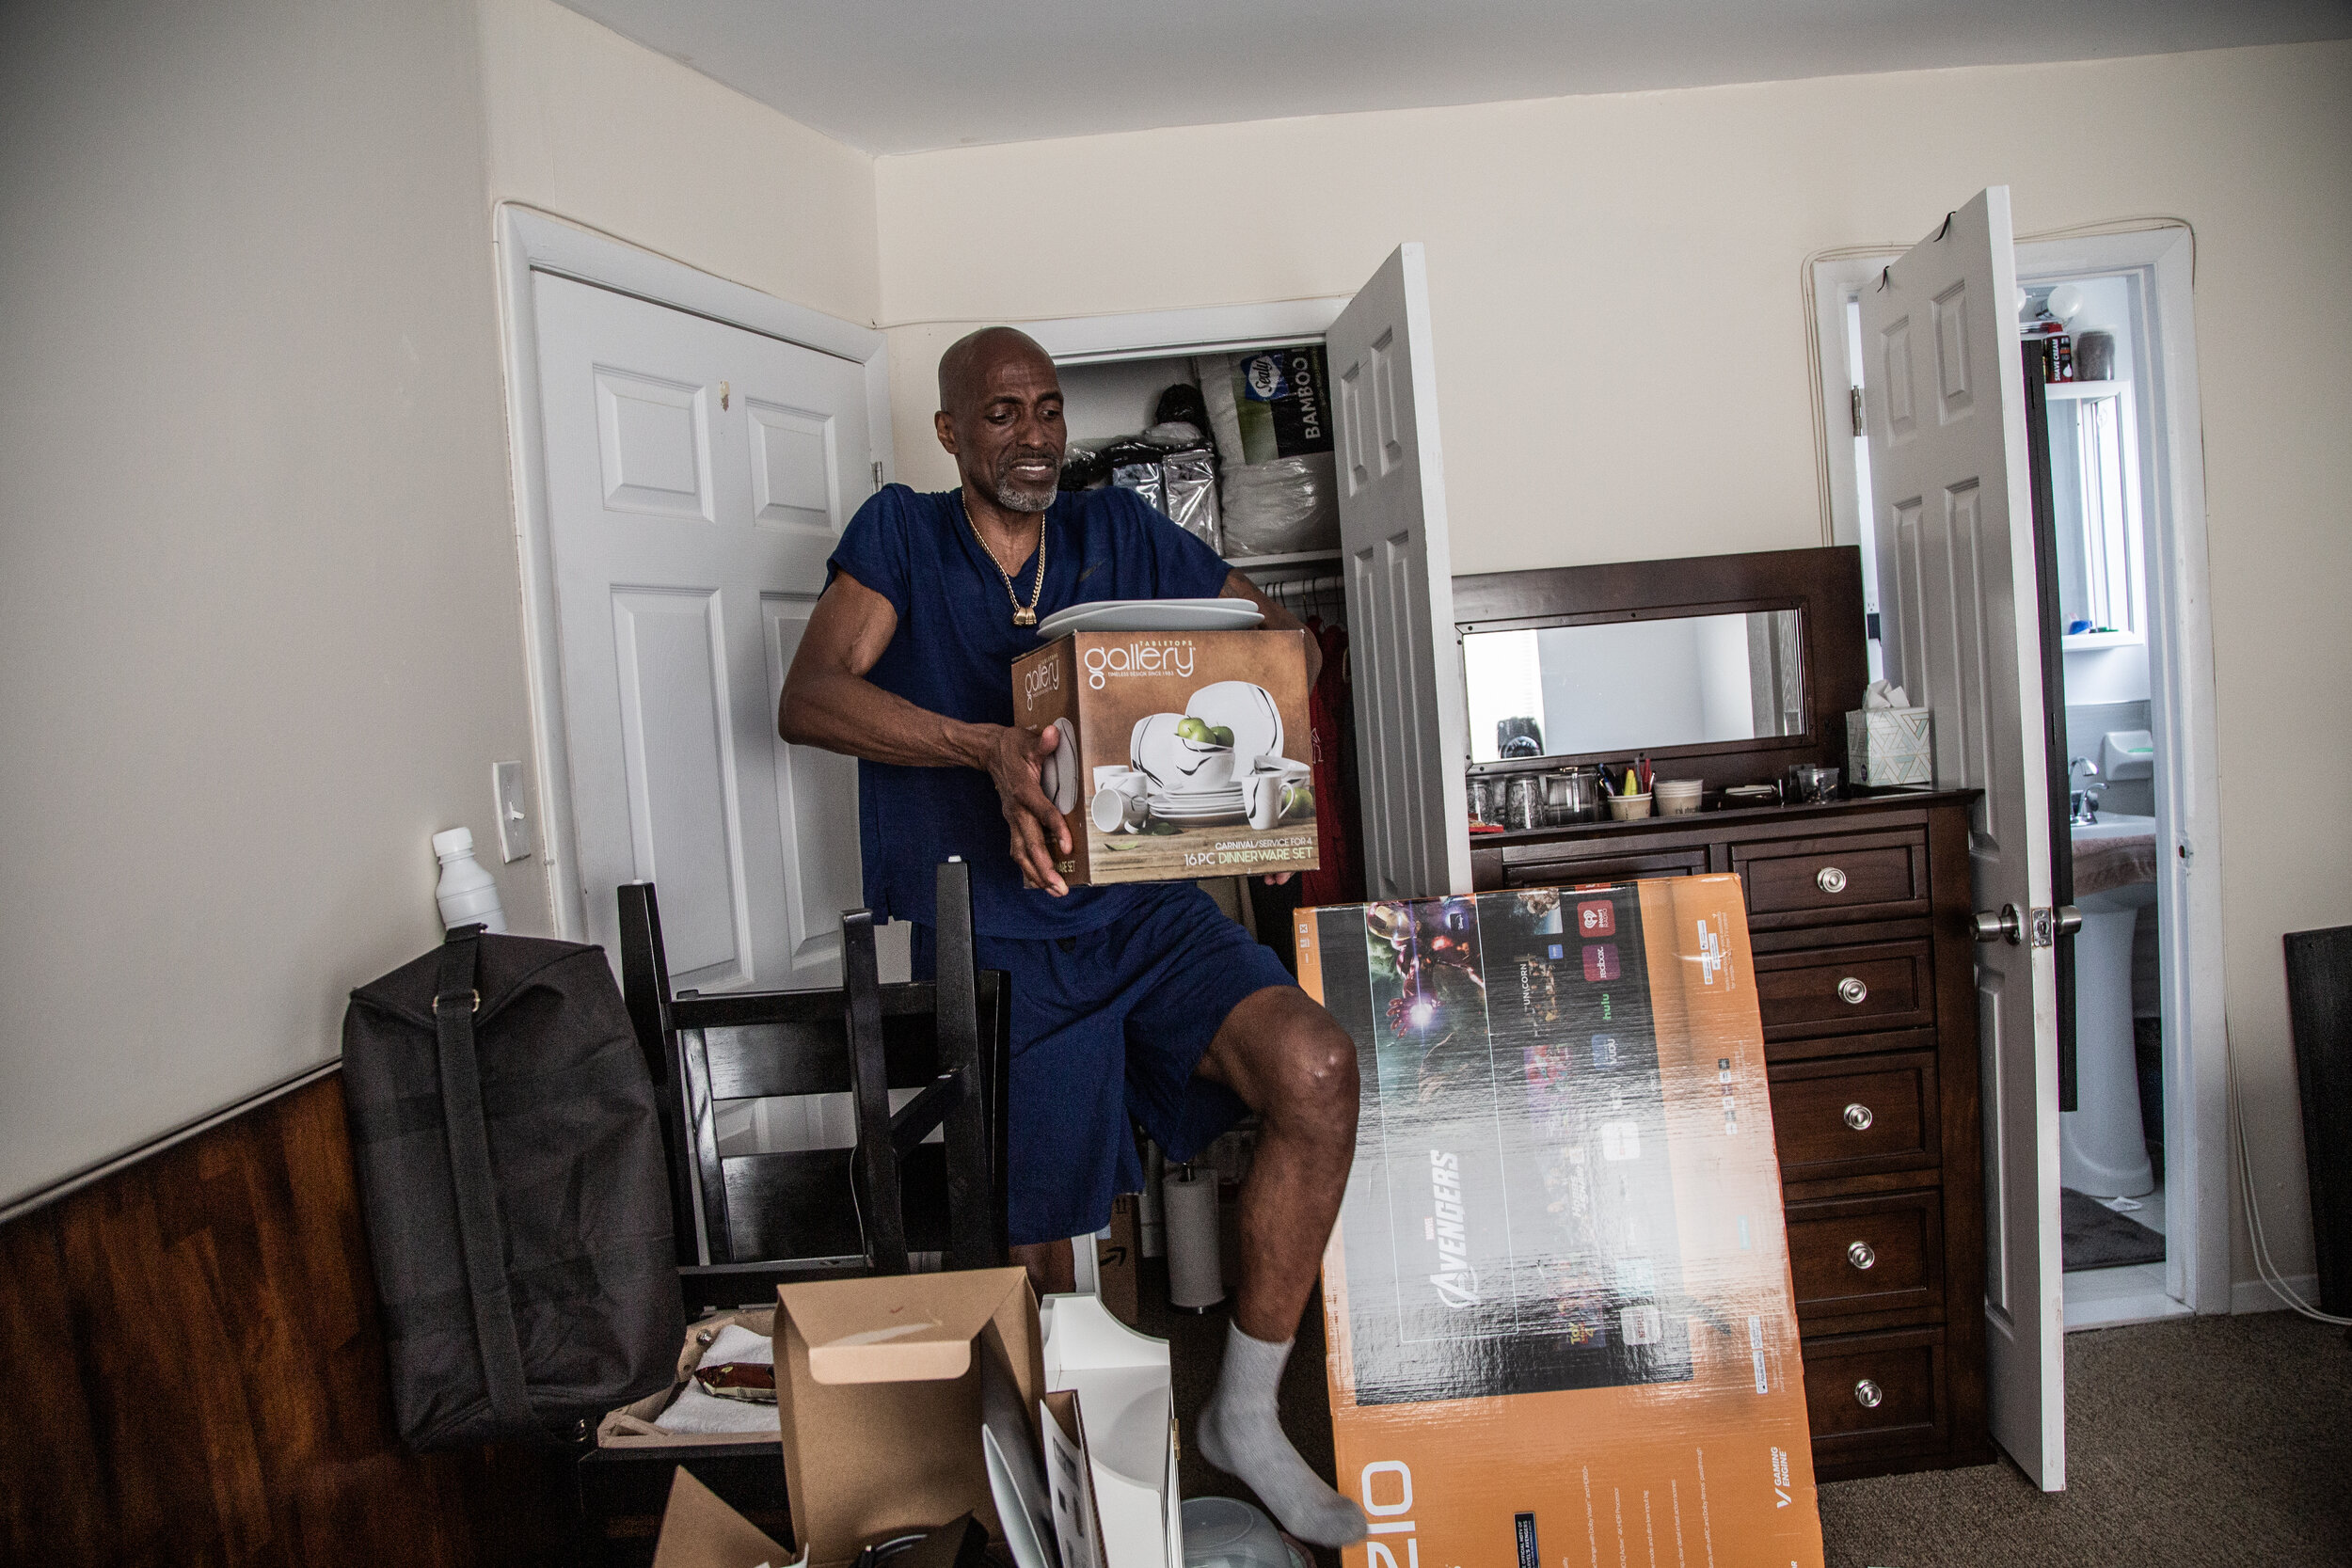  Kevin Mays carries his new cutlery inside his bedroom in The Bronx on May 19, 2021. 